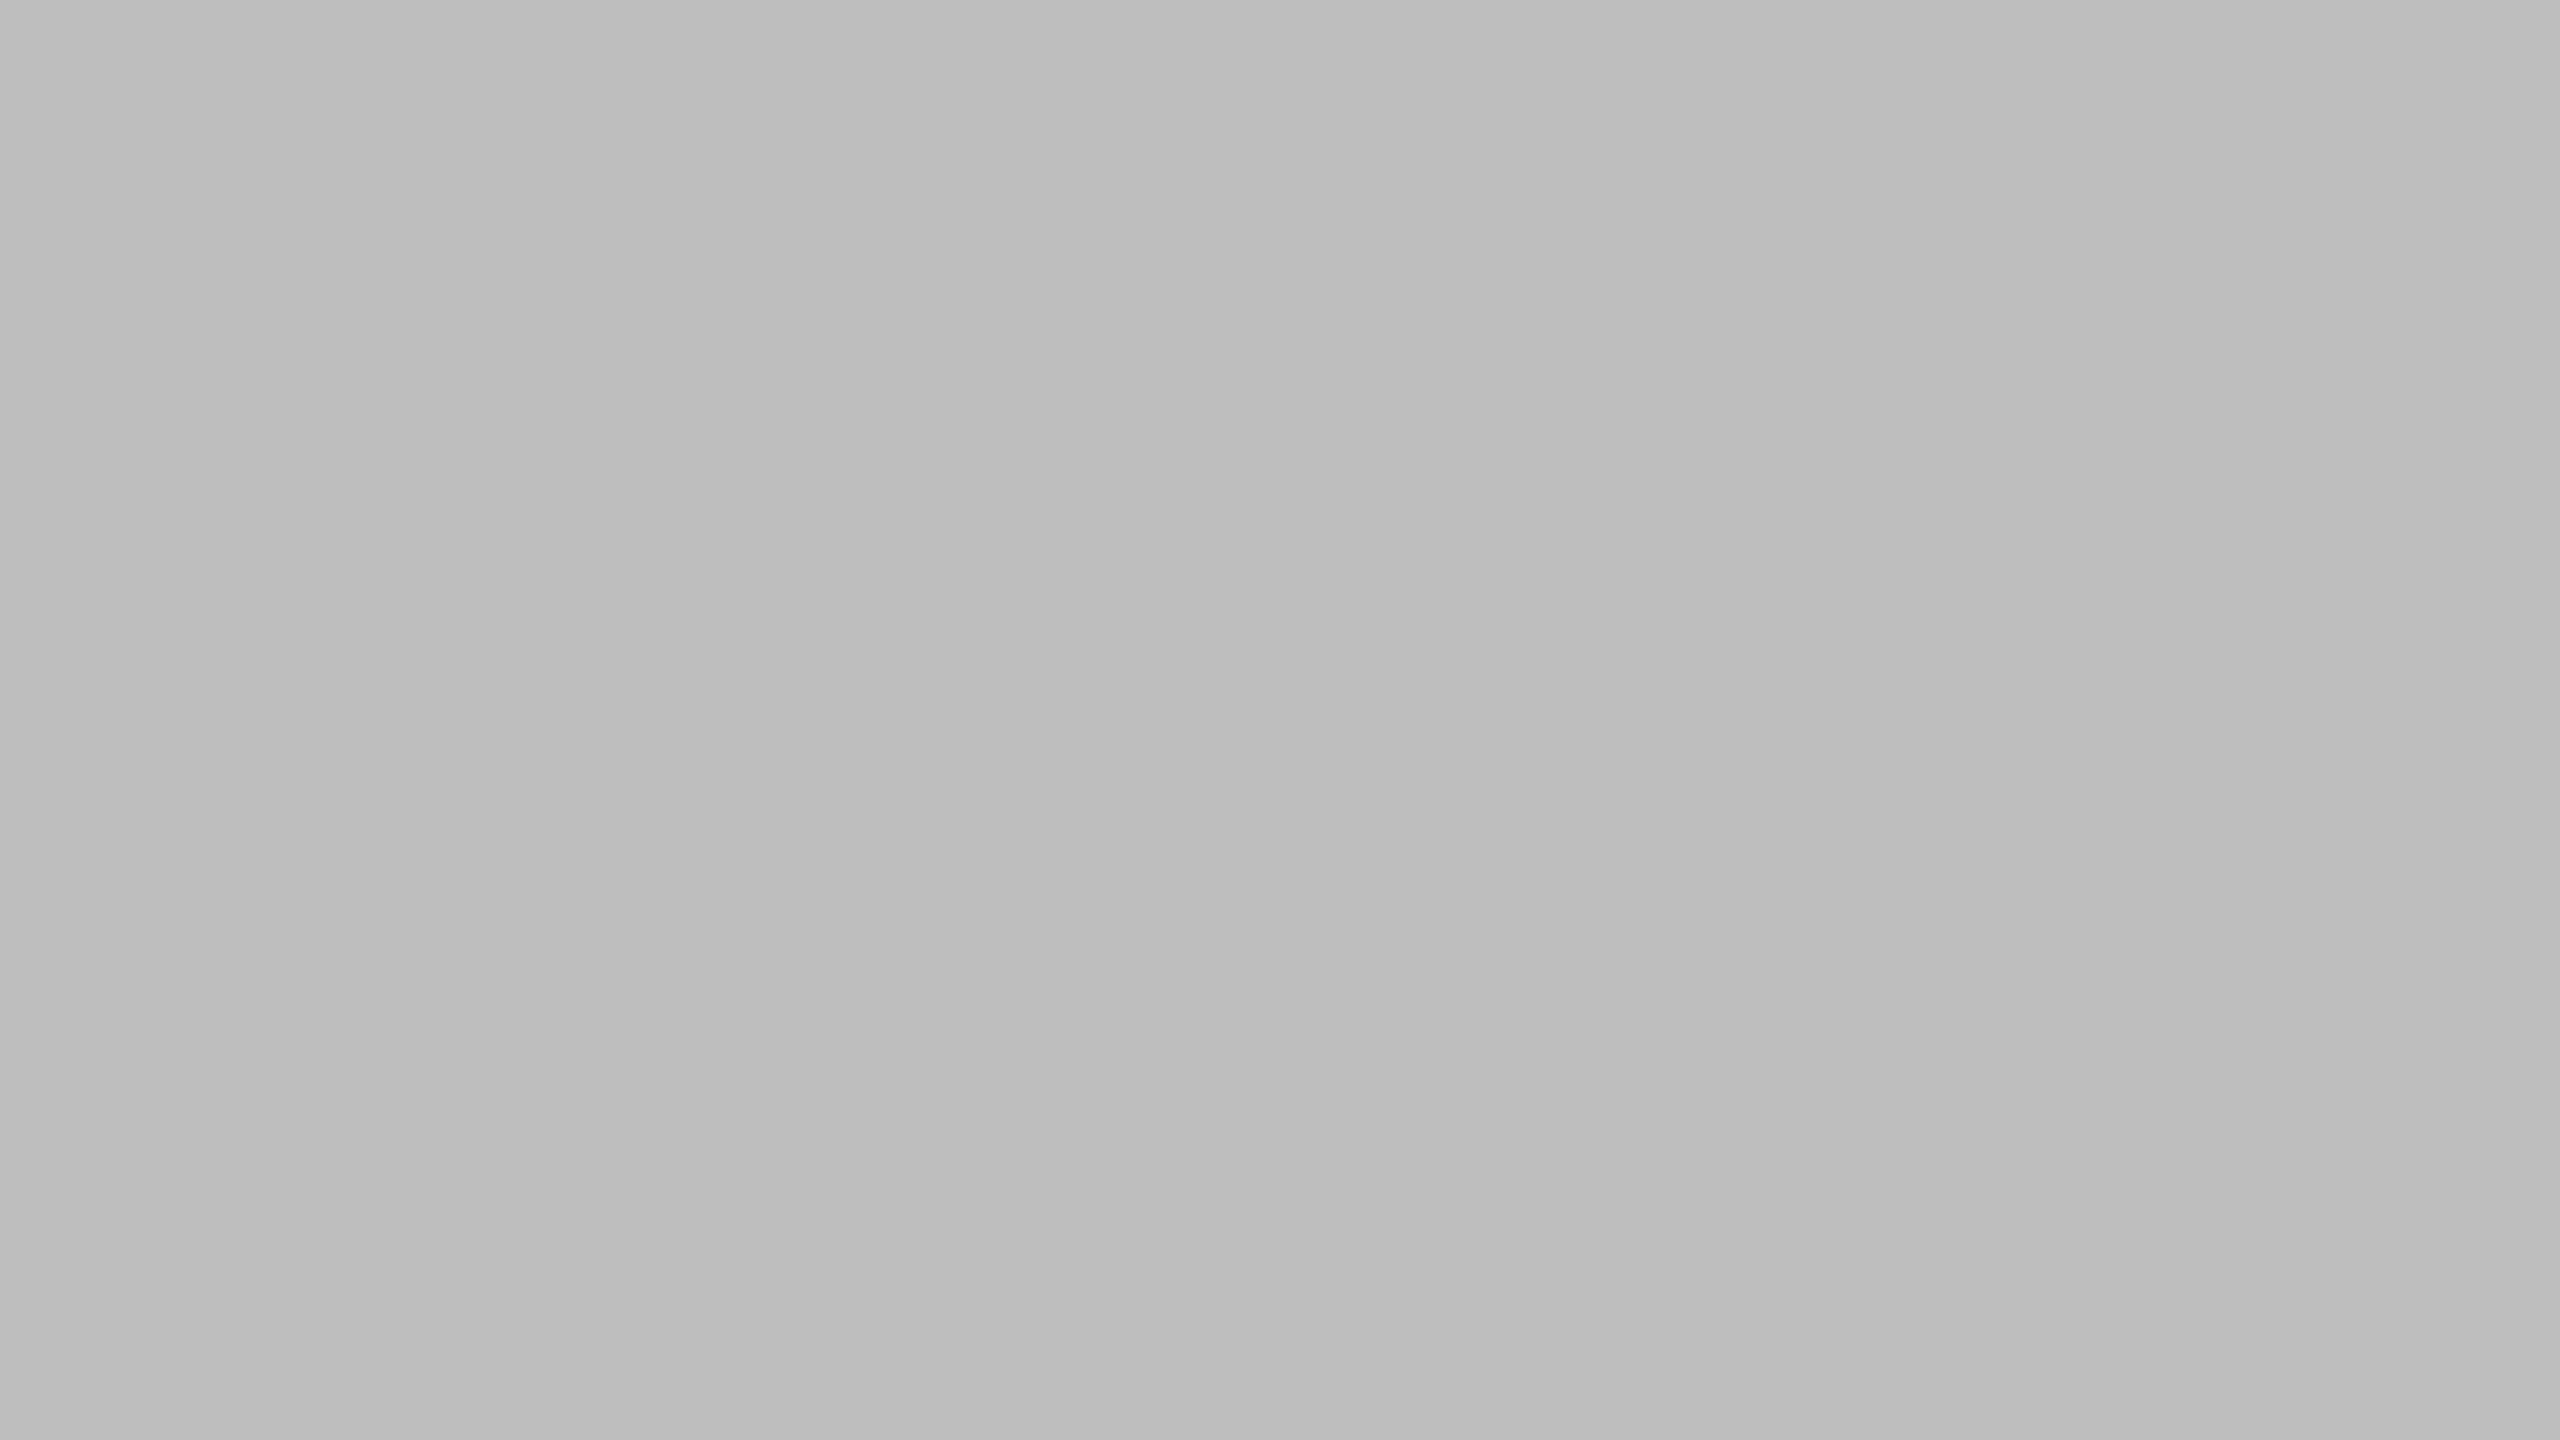 2560x1440 Gray X11 Gui Gray Solid Color Background